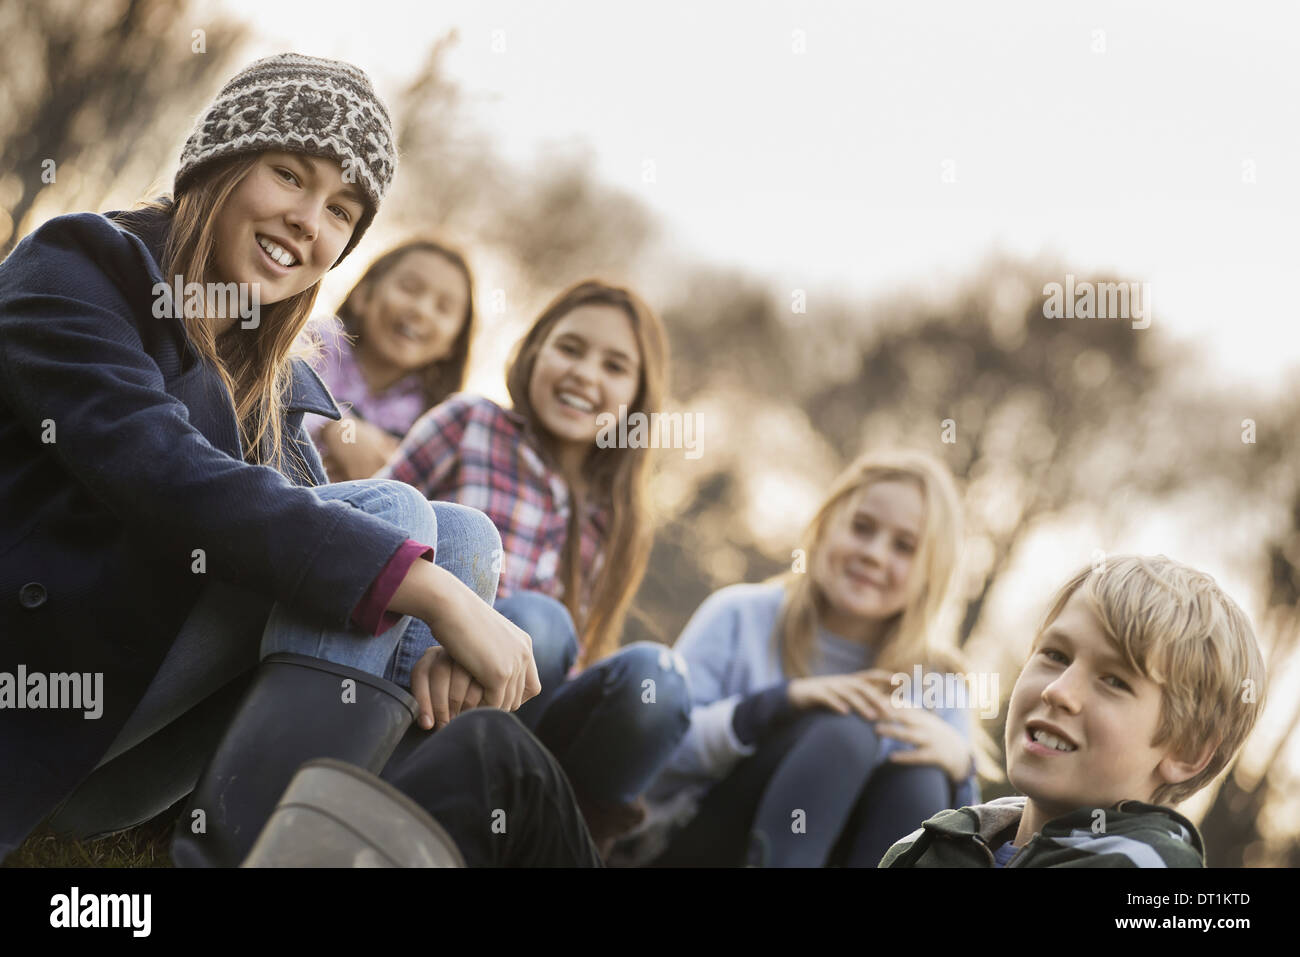 Five children on a farm Boys and girls in warm jackets outdoors Stock Photo